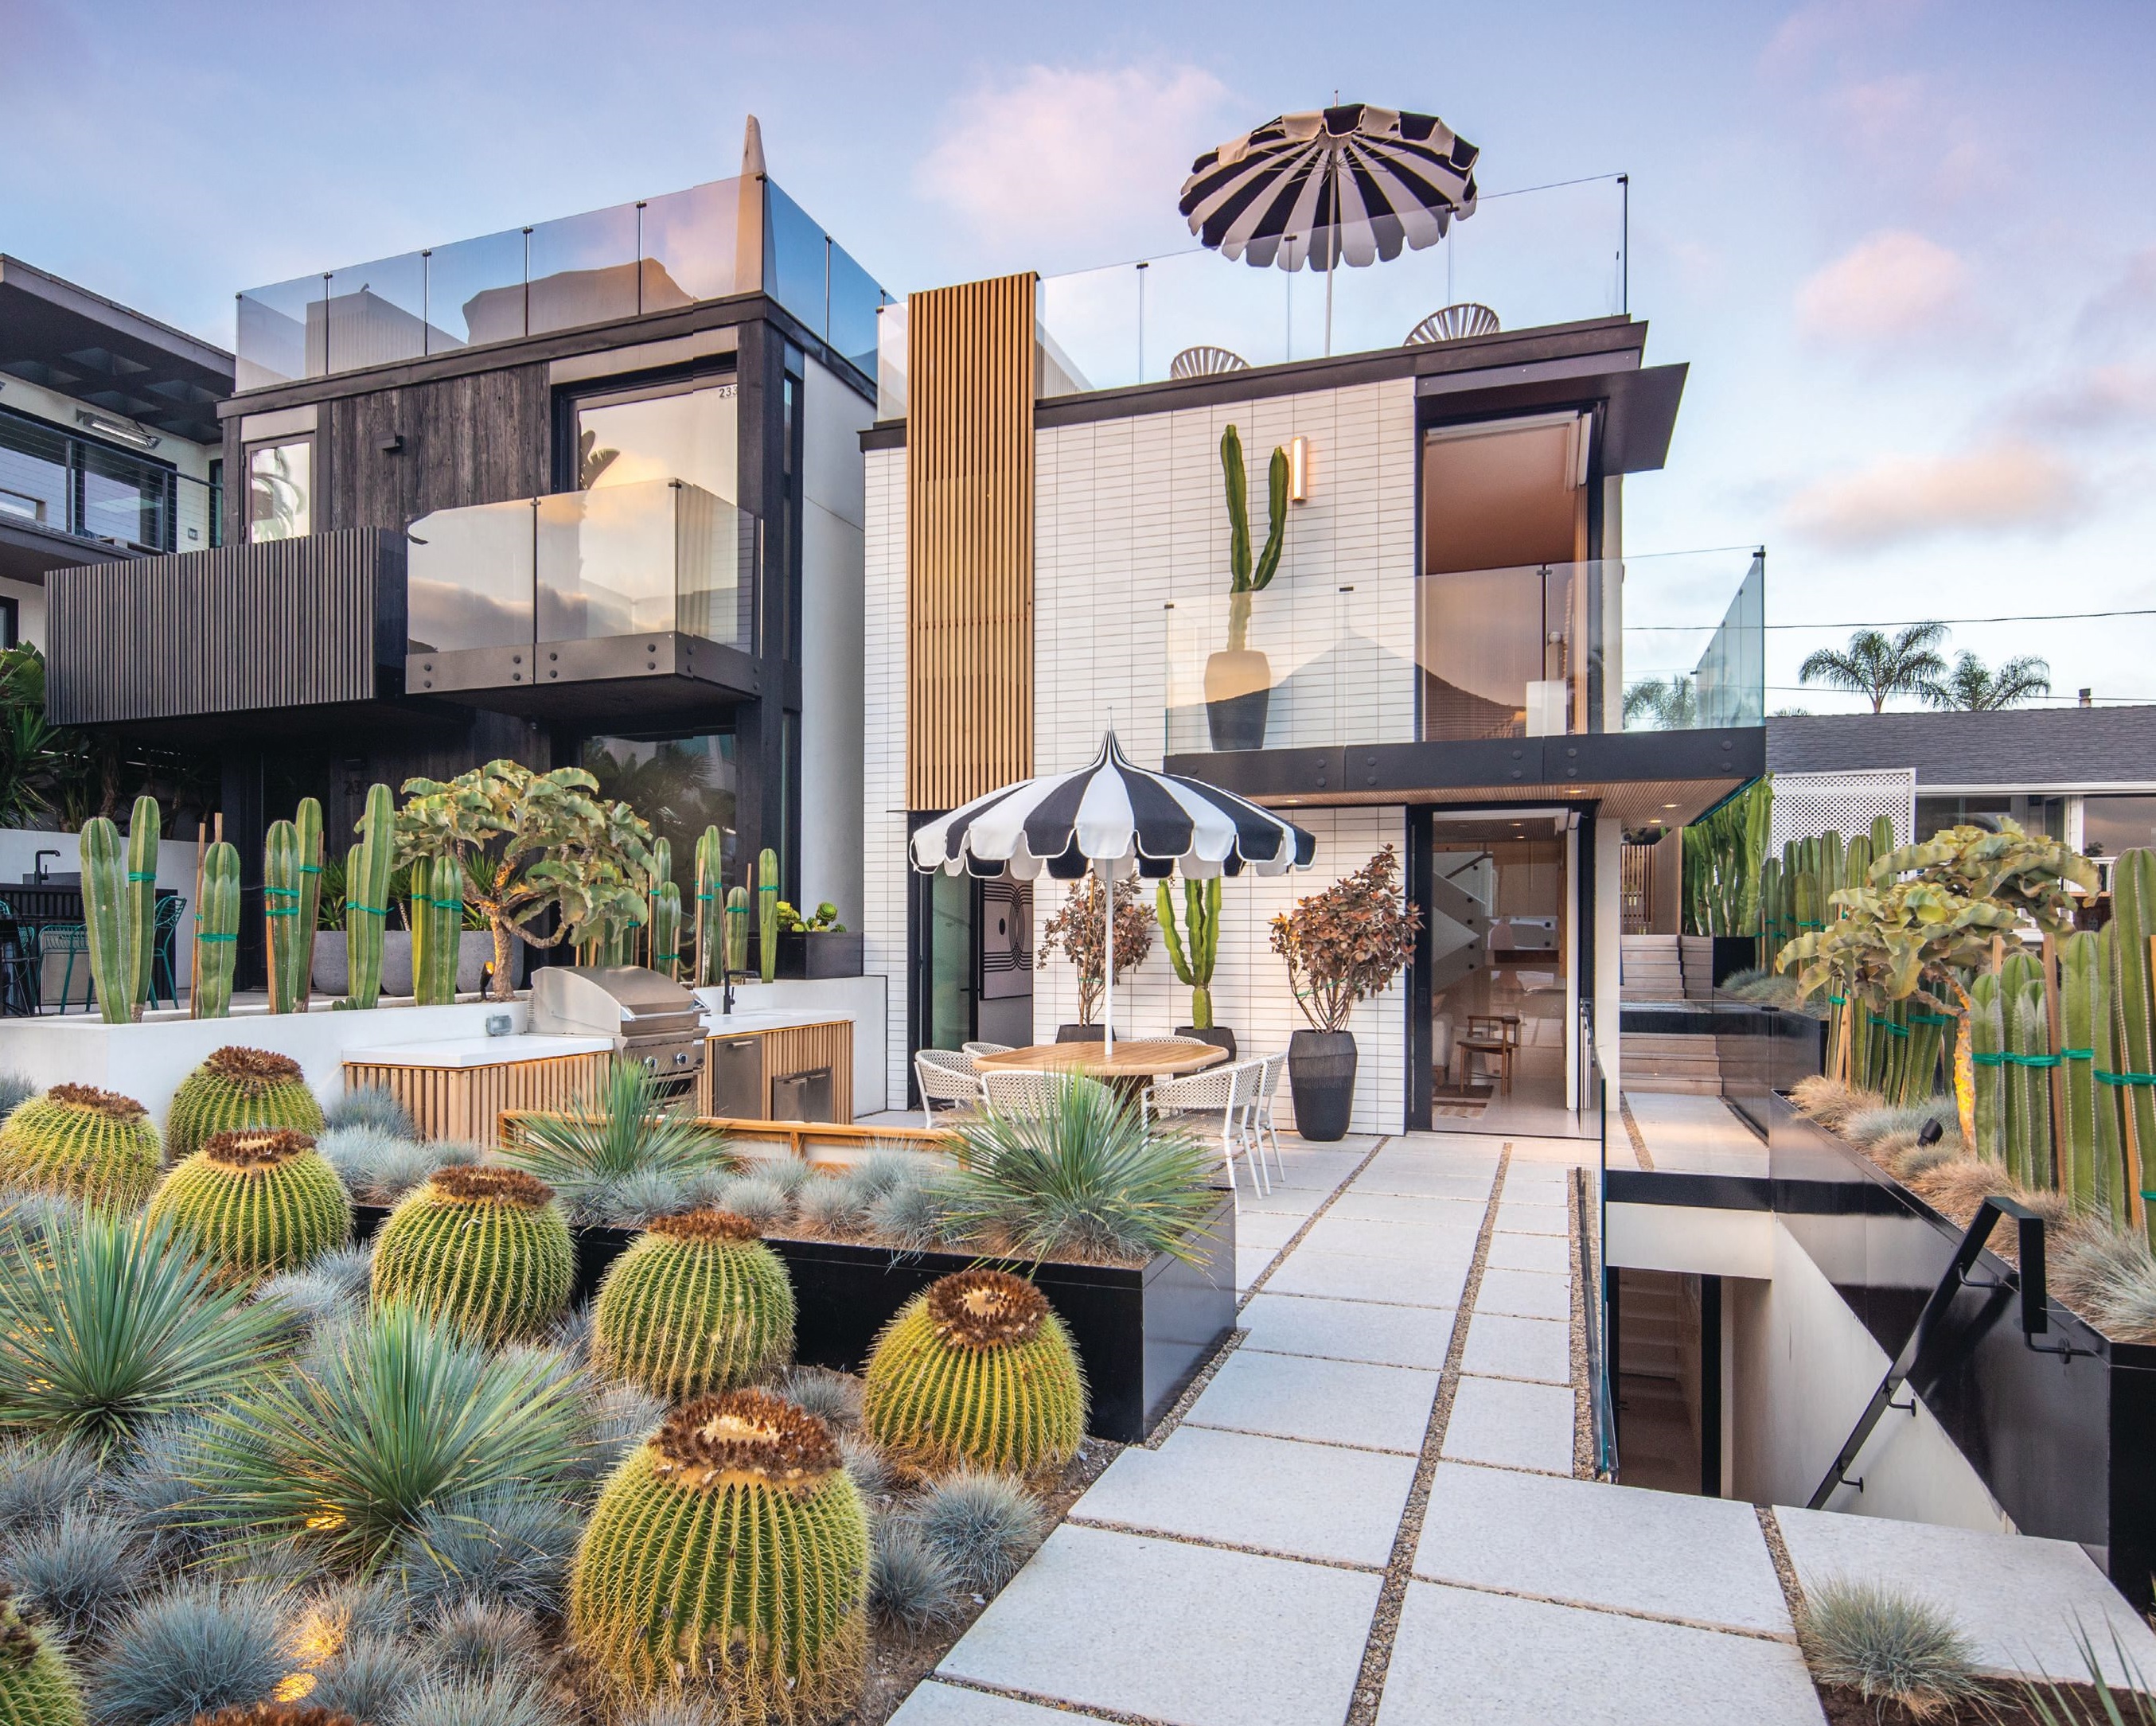 Desert-inspired landscaping and sleek outdoor spaces gives this three-story saltbox plenty of curb appeal. PHOTO BY SAM CHEN/ALOHA PHOTOGRAPHY